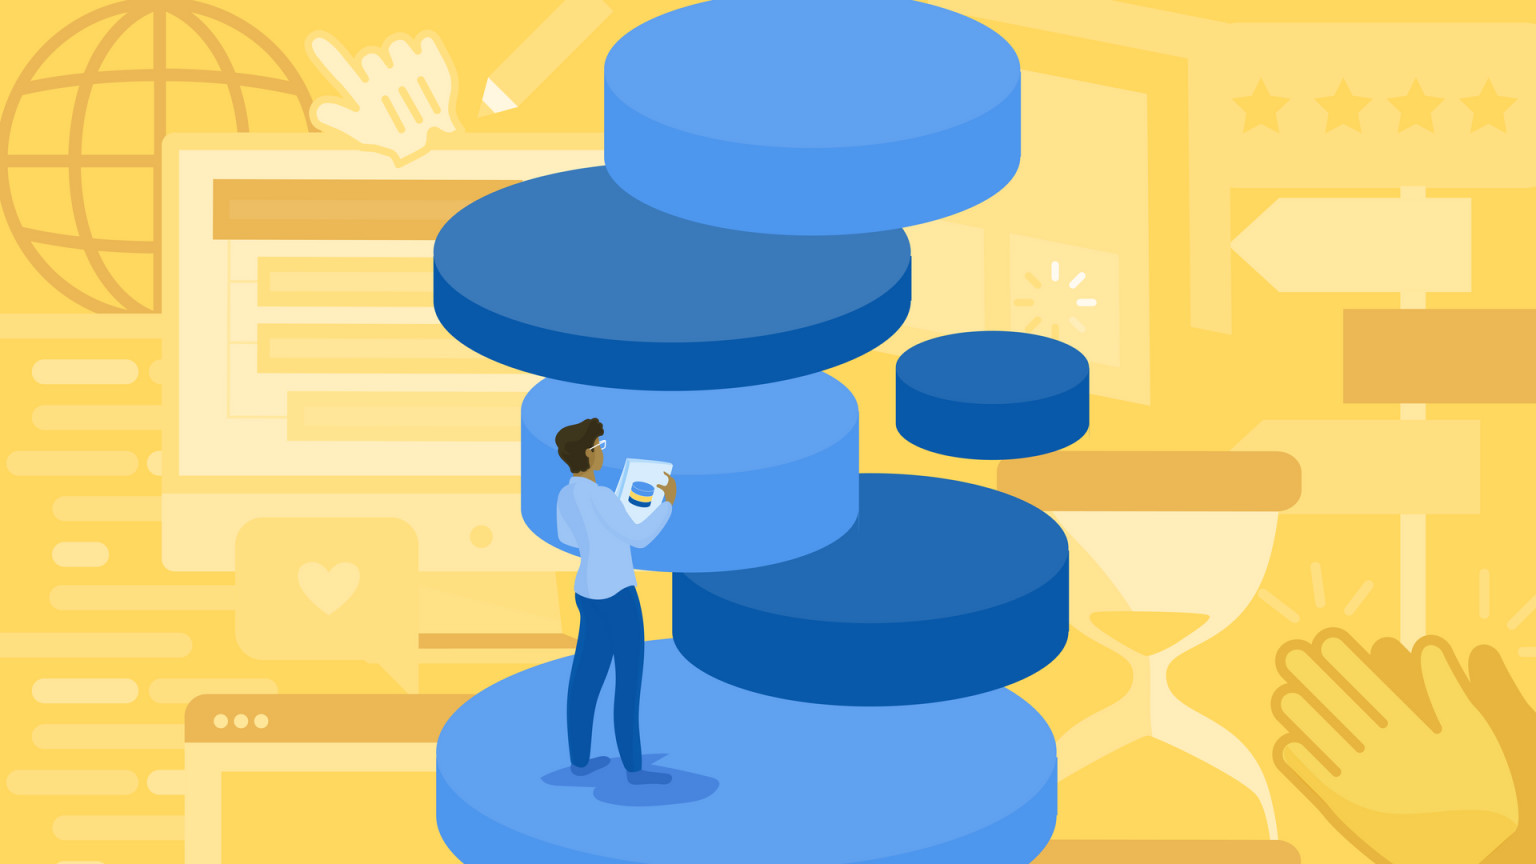 Pondering over the benefits of microservices over monolithic services? Here's some guidance and resources to help select the right architecture for you.